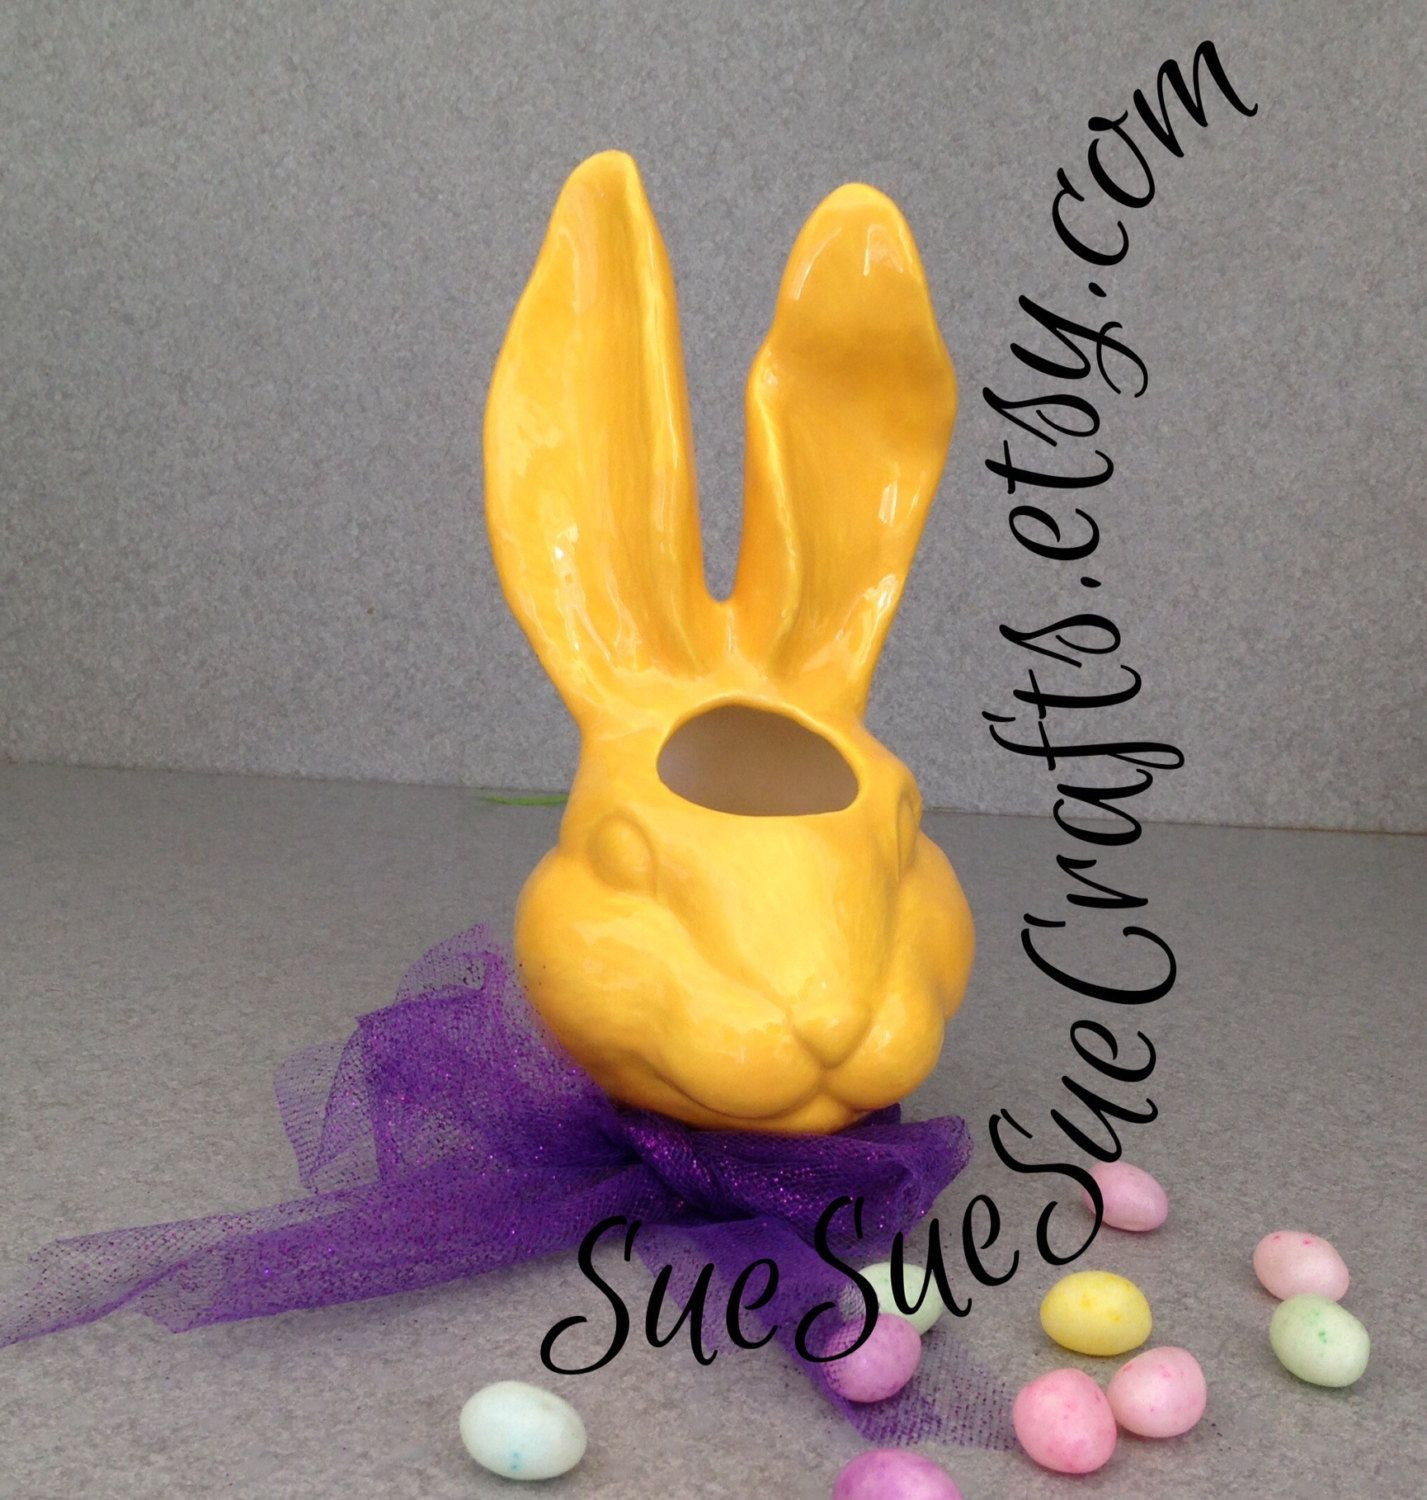 13 attractive Yellow Vases for Sale 2024 free download yellow vases for sale of sale large yellow rabbit head vase brush or pencil holder easter in sale large yellow rabbit head vase brush or pencil holder easter bunny planter by suesuesuecrafts